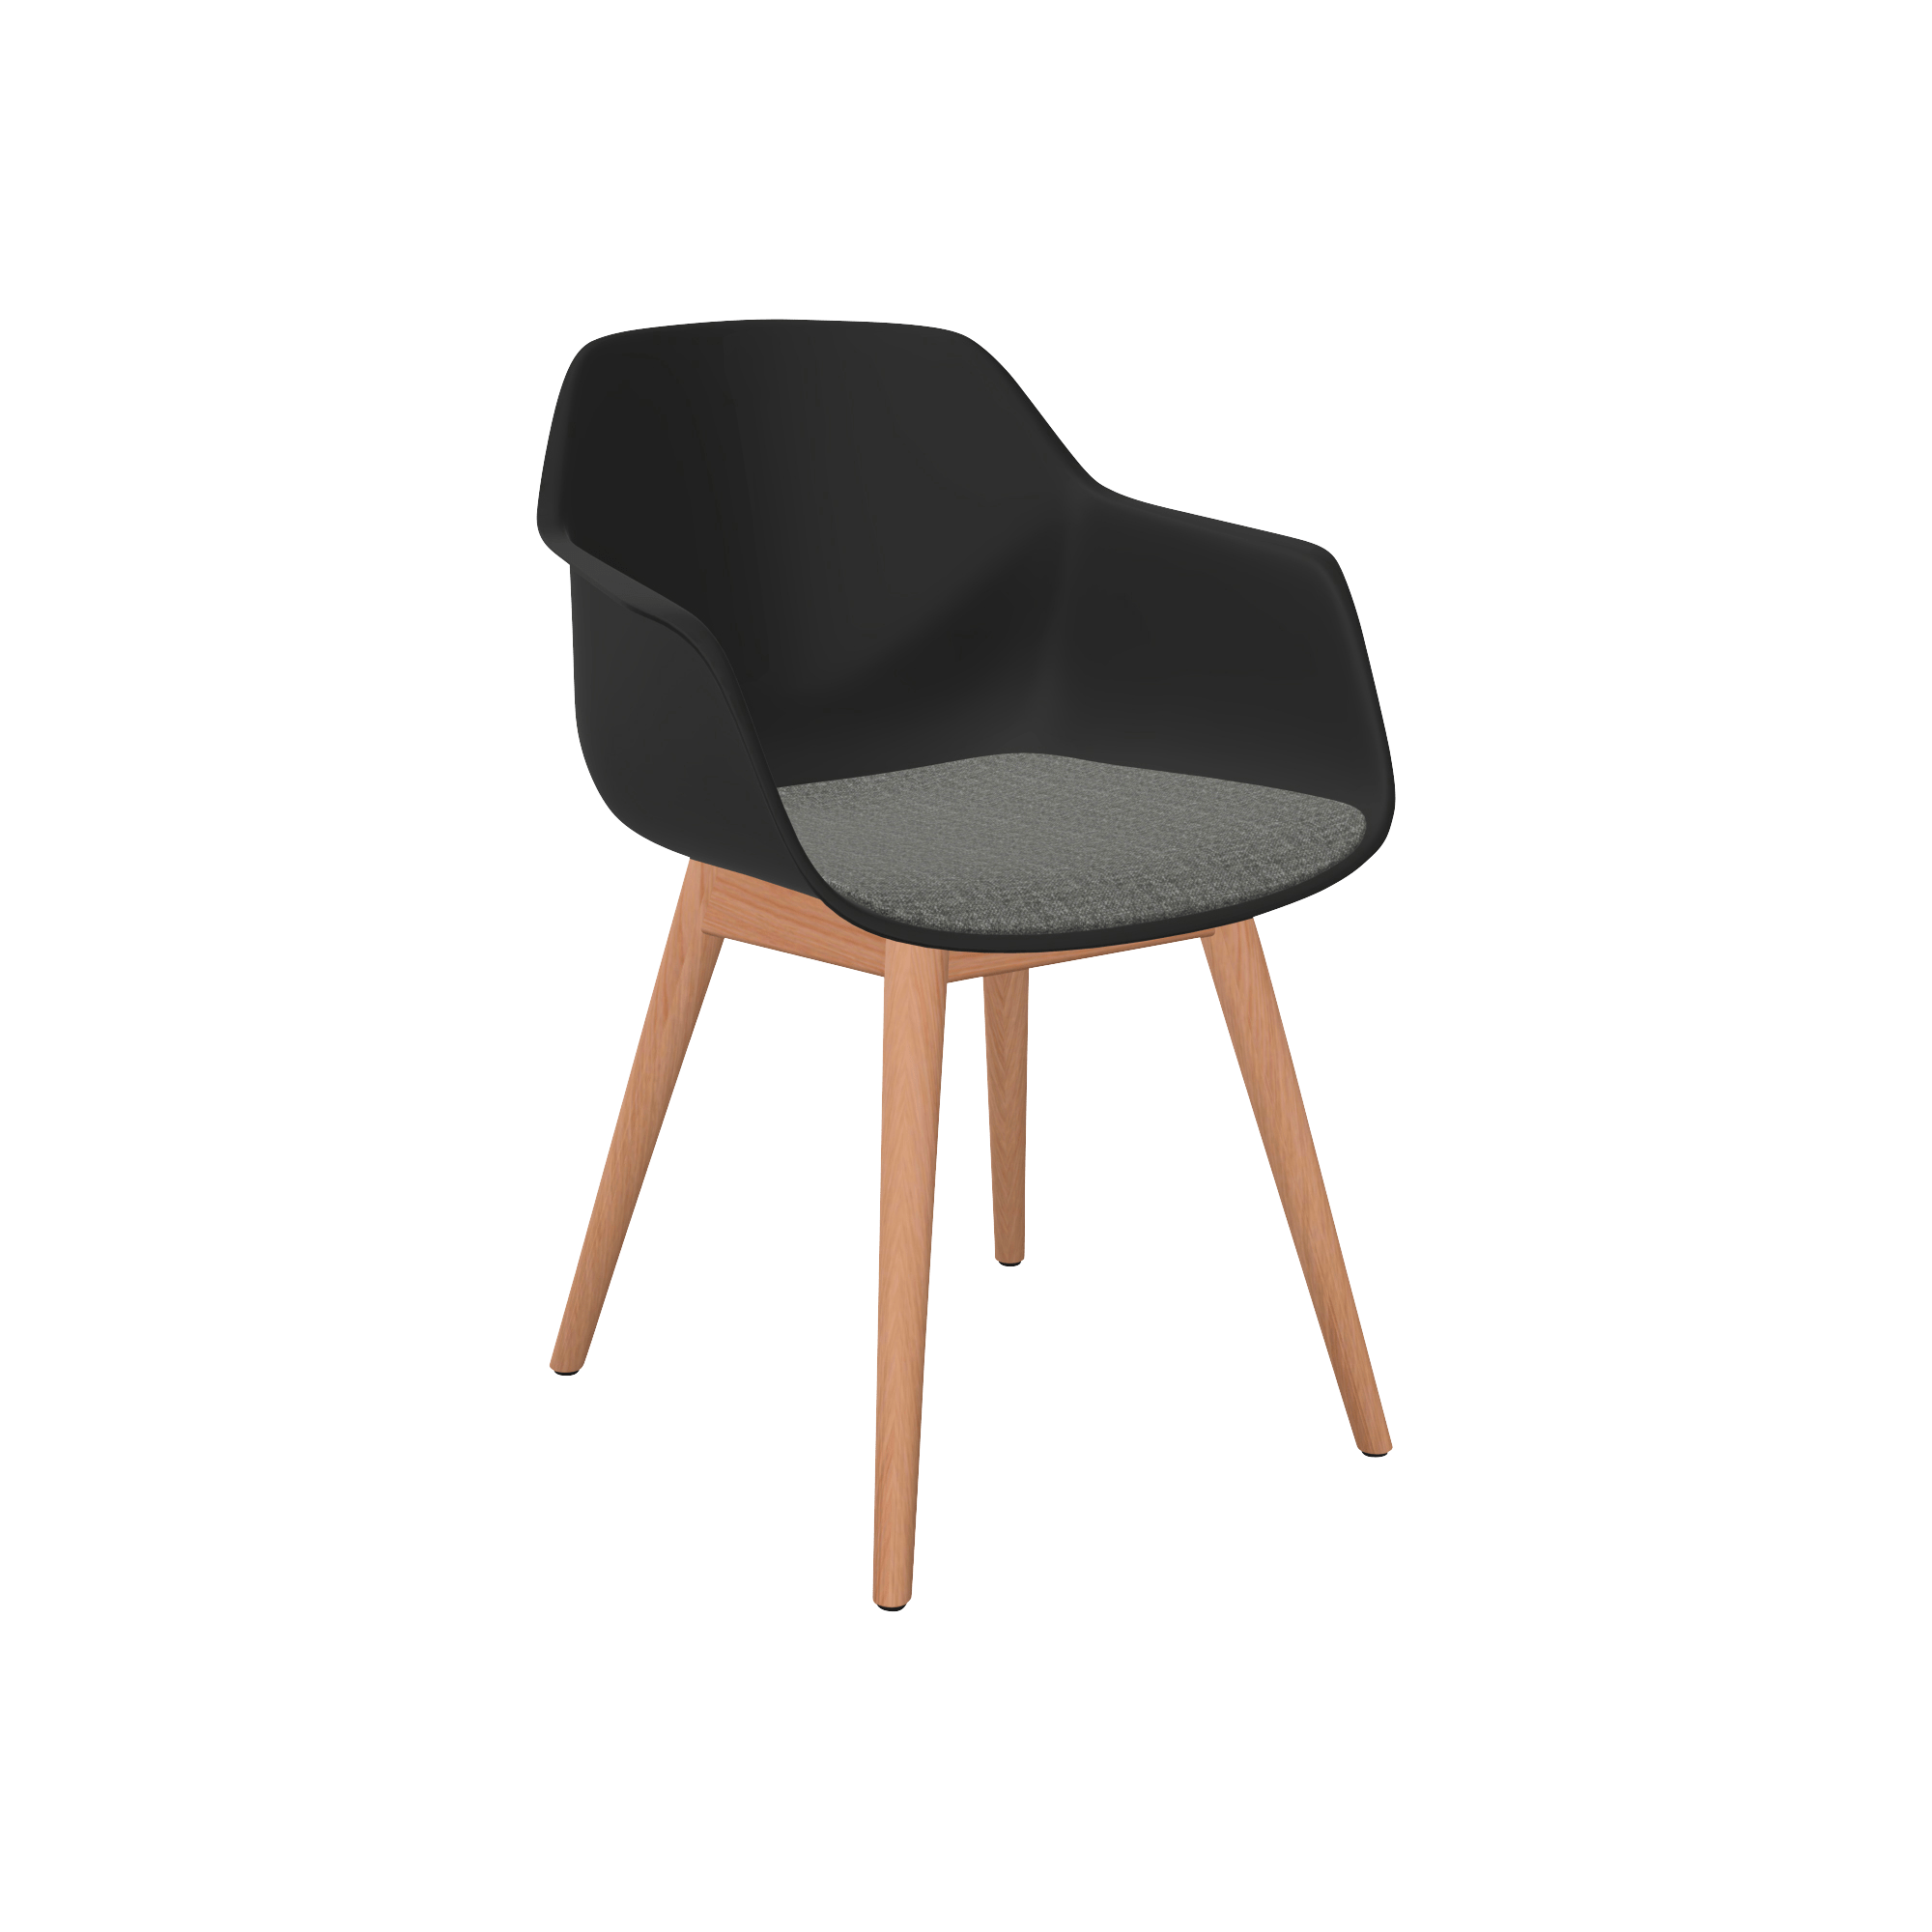 designer office chair with wooden legs